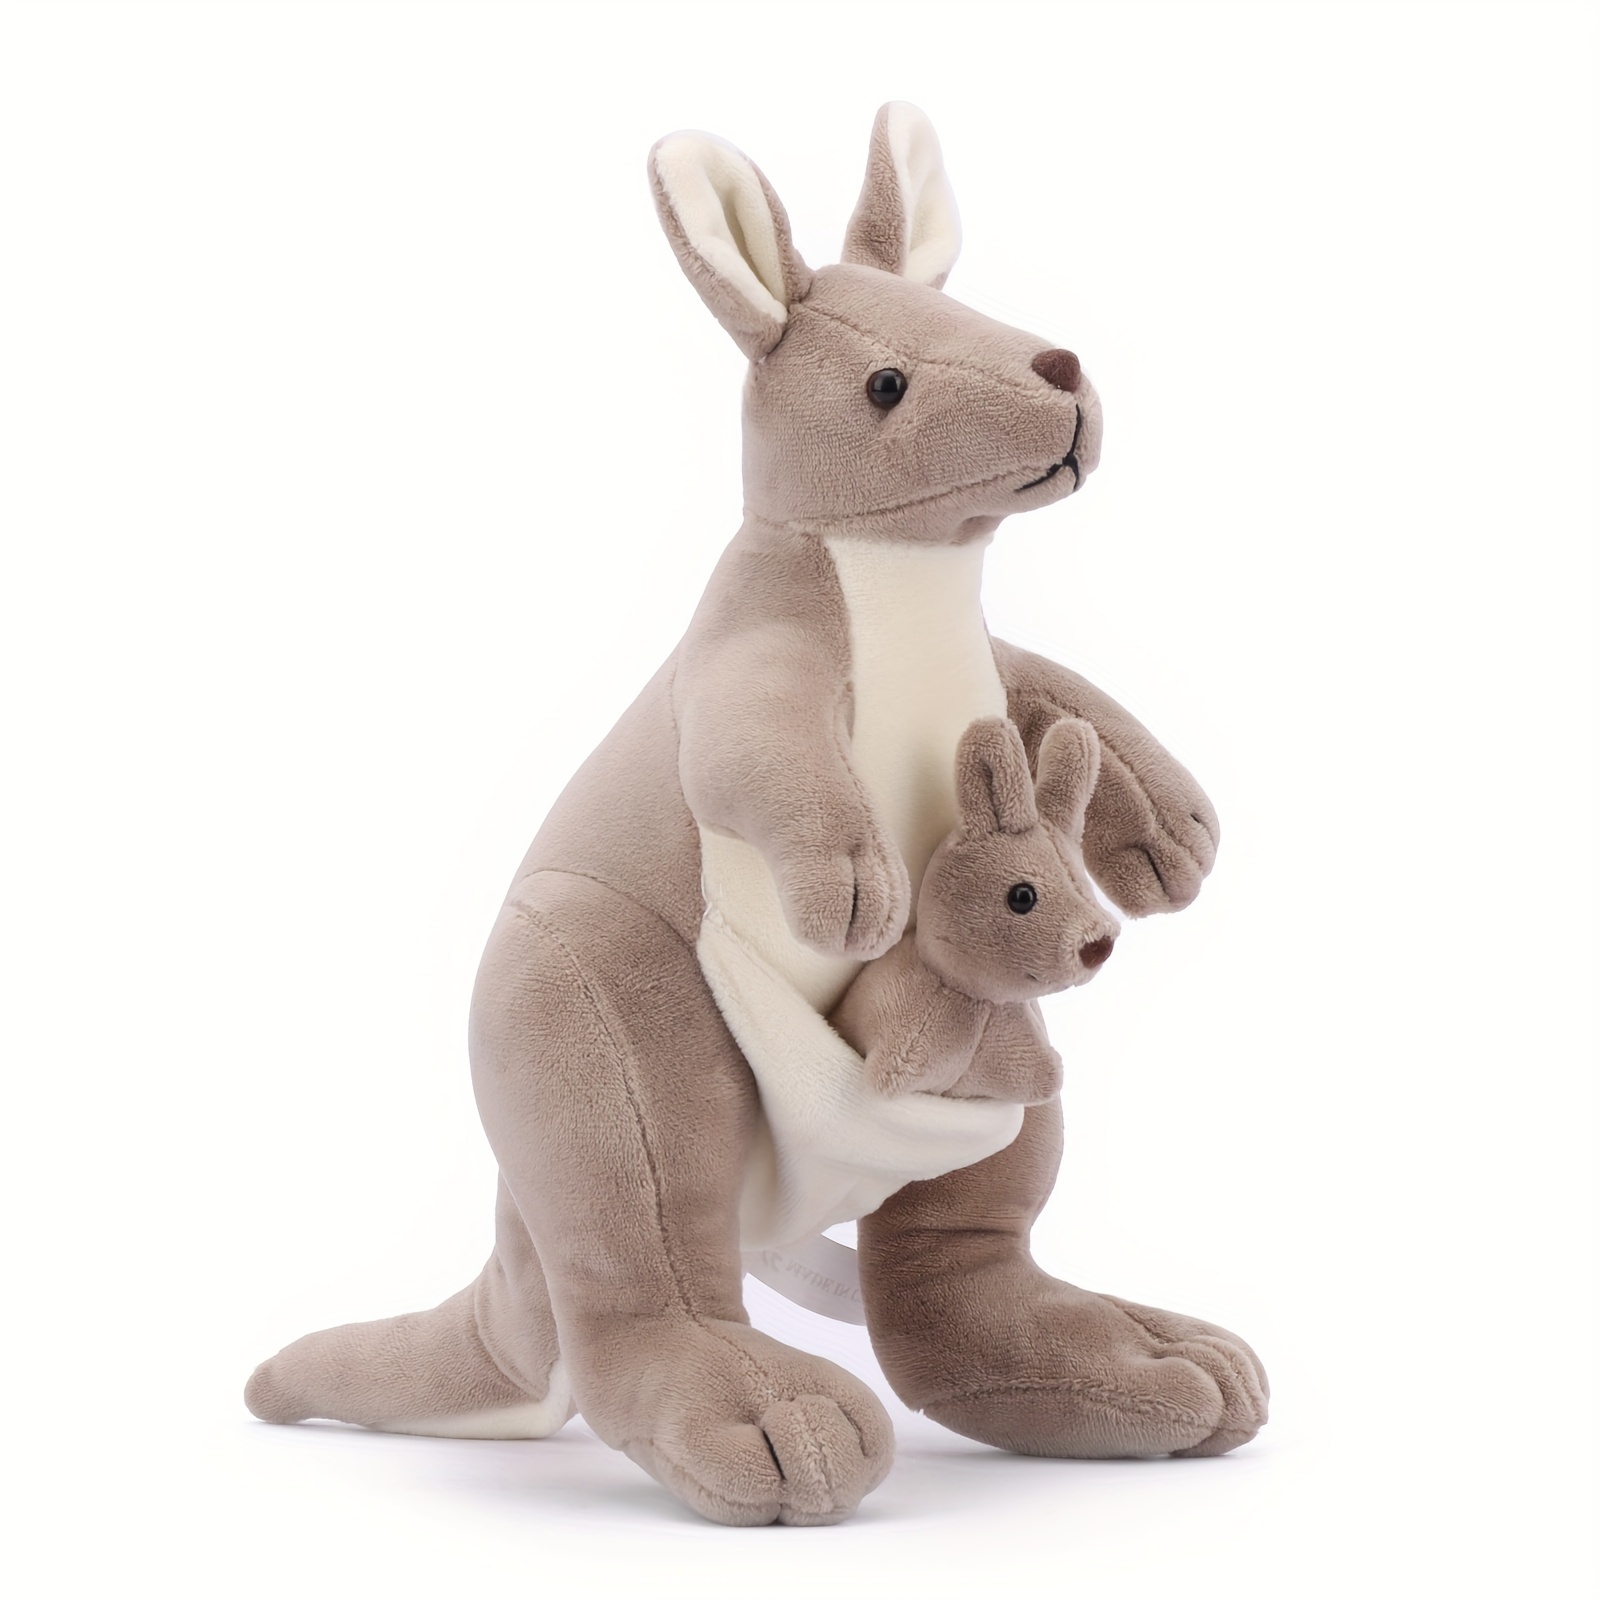 

Cuddly Kangaroo & Baby Plush Toy Set - Soft Stuffed Animal Pair, Perfect For Birthday & Holiday Gifts, Ideal For Kids 0-3 Years Stuffed Animals For Babies Kangaroo Stuffed Animal